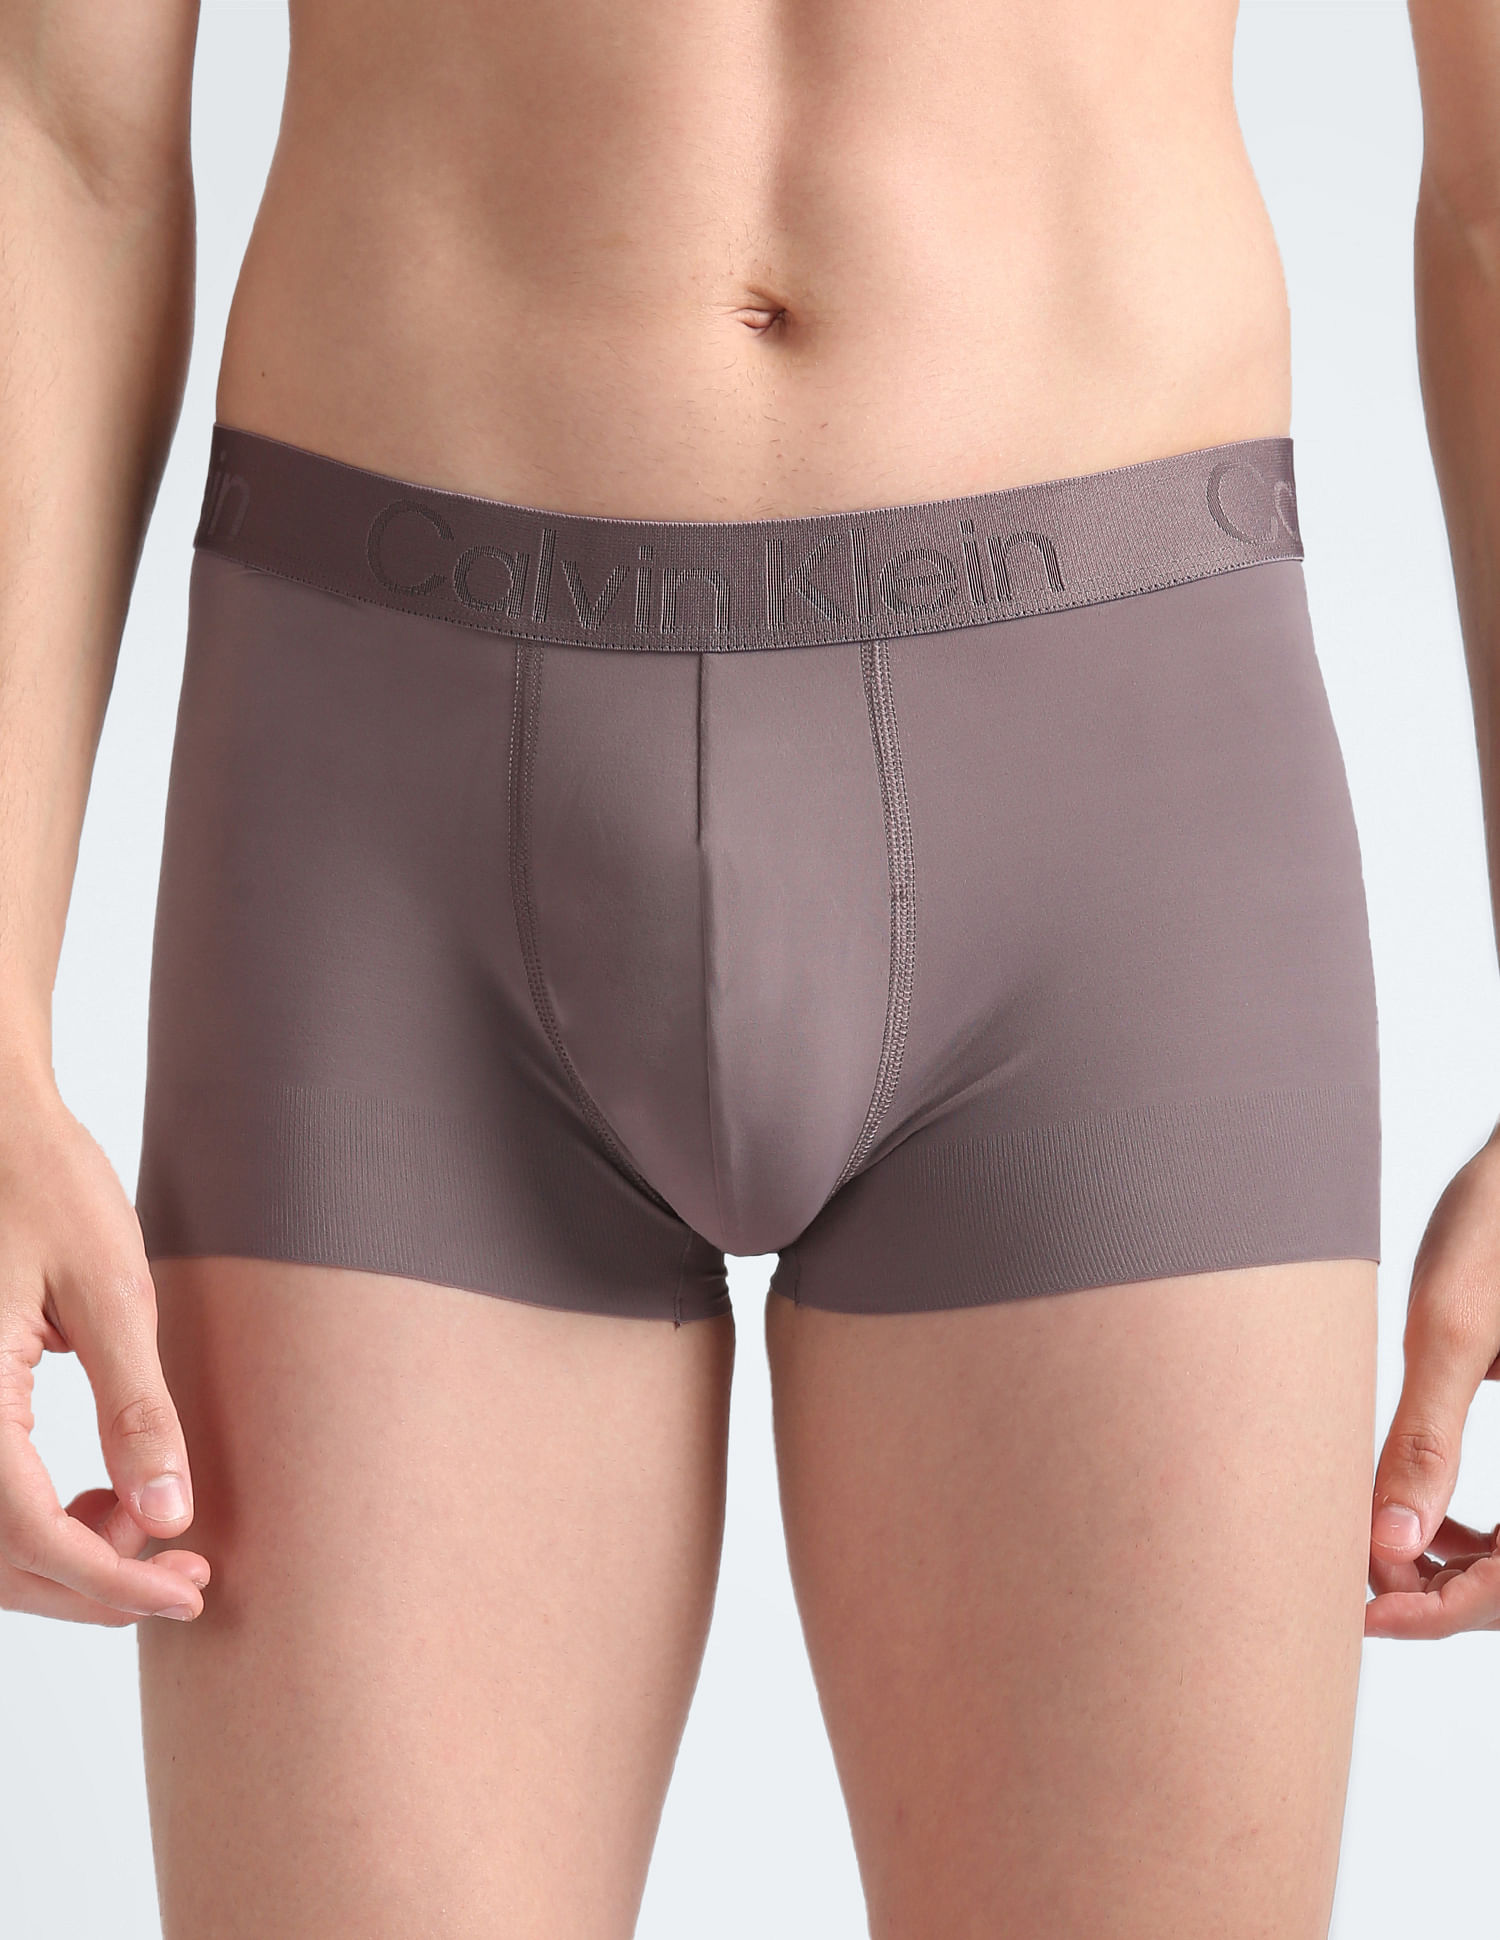  Calvin Klein Men's Customized Stretch Low Rise Trunks, Grey  Sky, X-Large : Clothing, Shoes & Jewelry